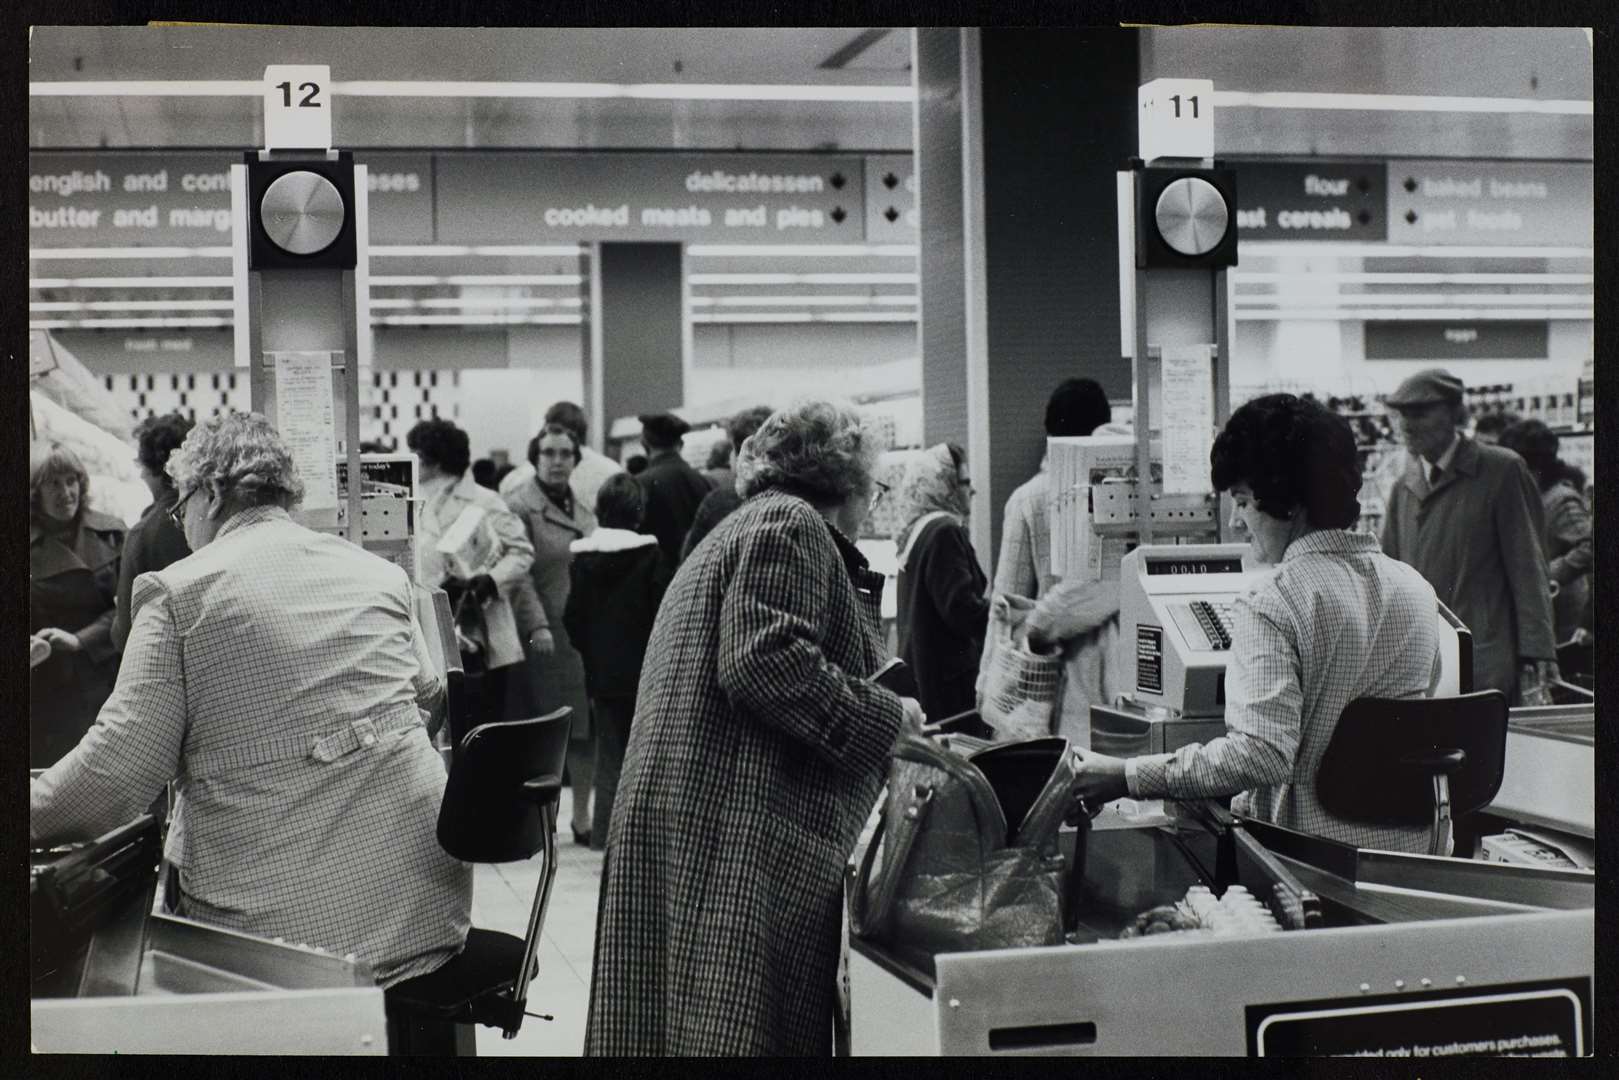 A historic photo showing a busy day at the tills at the Sainsbury's in 1976. Picture: The Sainsbury Archive, Museum of London Docklands